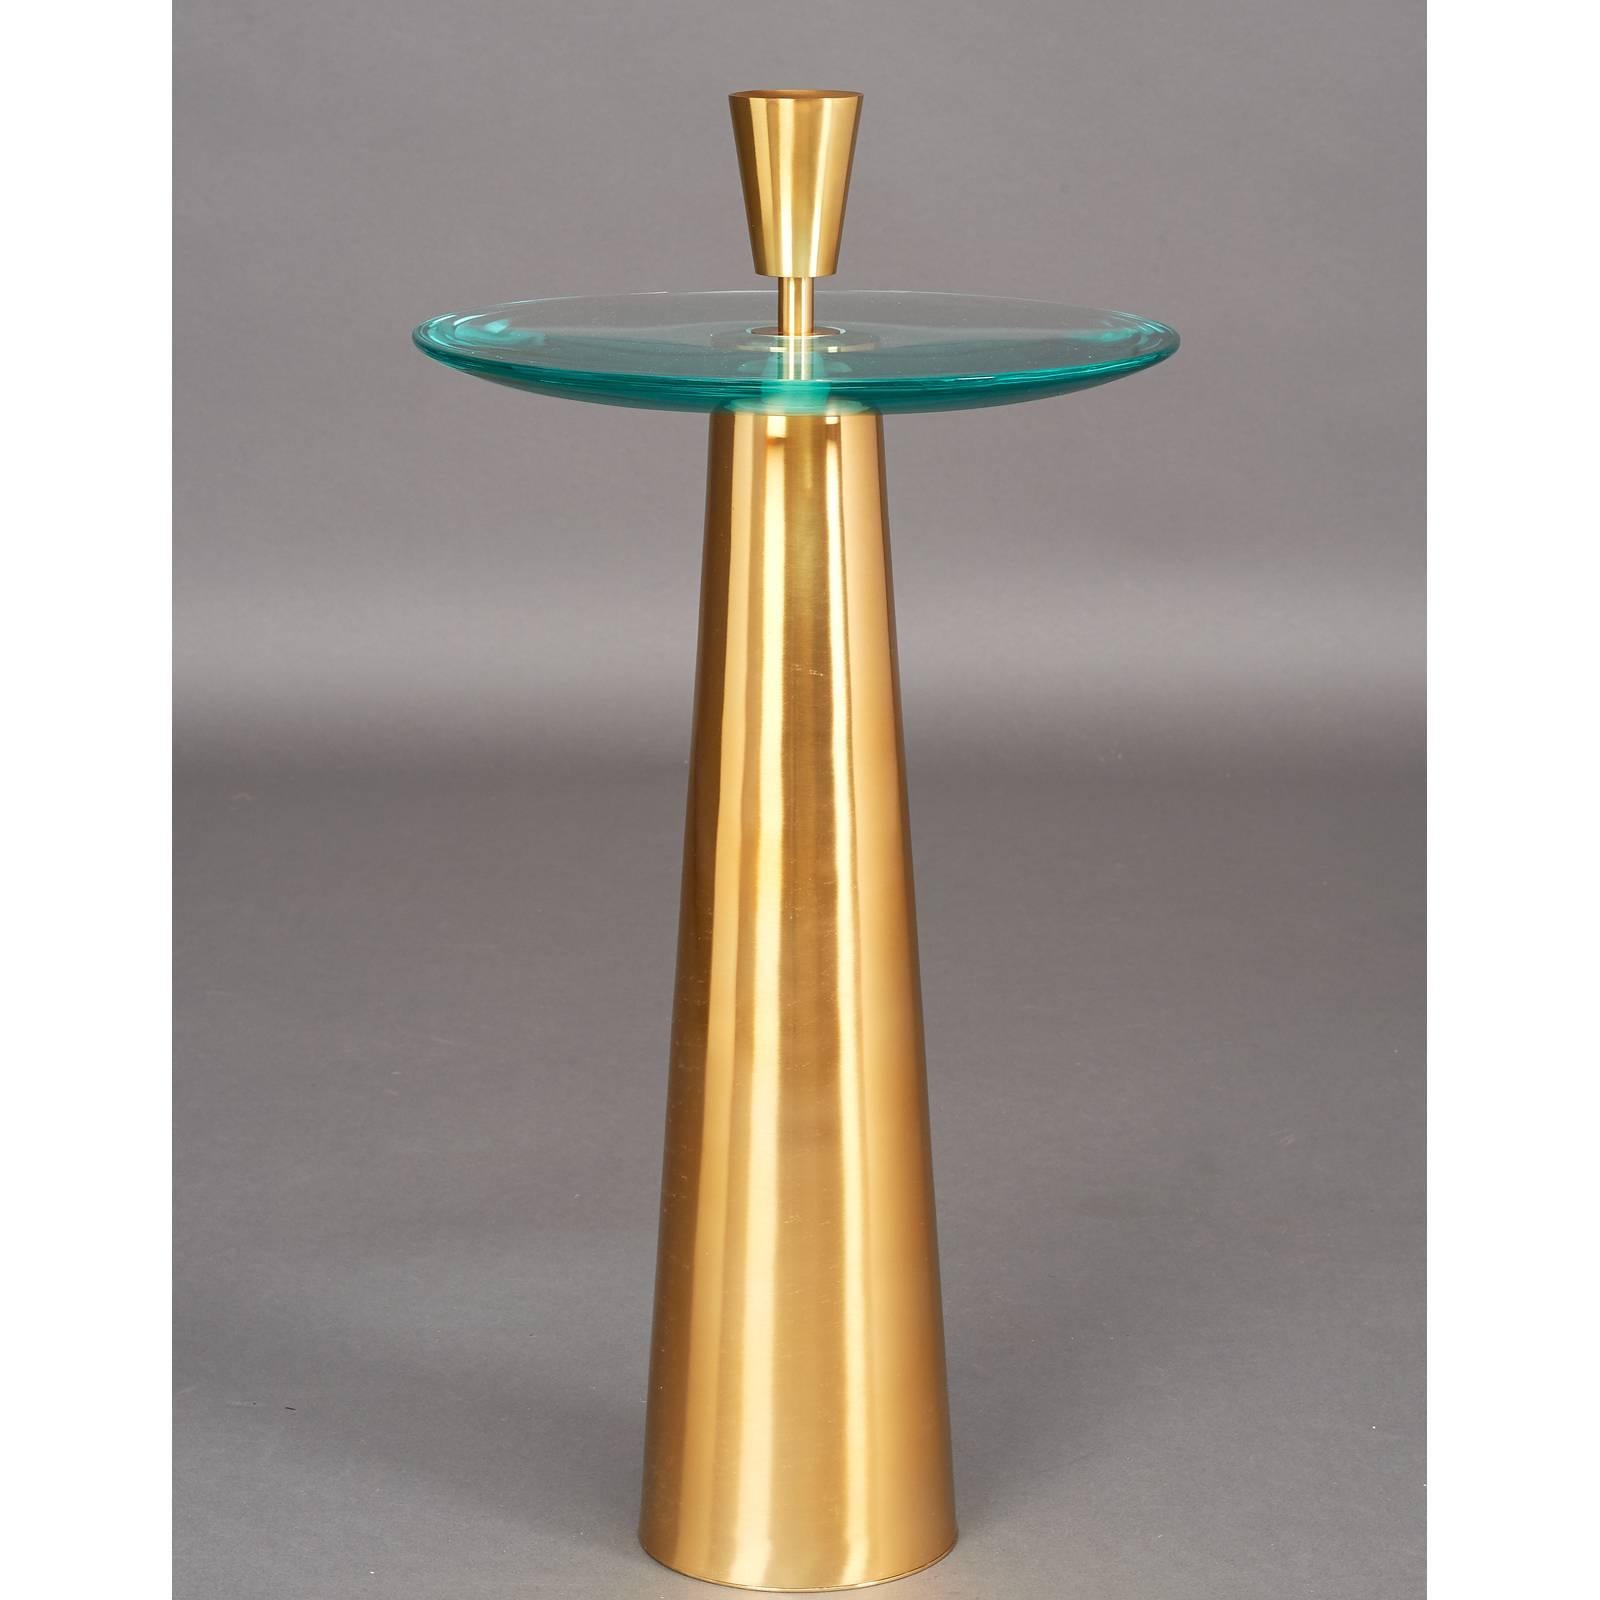 ROBERTO RIDA (b. 1943).
Sculptural side table with massive ground-glass top with convex underside, polished tapered brass base and finial. Signed. Italy, 2016.
Limited edition. Exclusive to L'Art de Vivre.
Dimensions: 13.5 Ø x 23 H at glass.
Shown